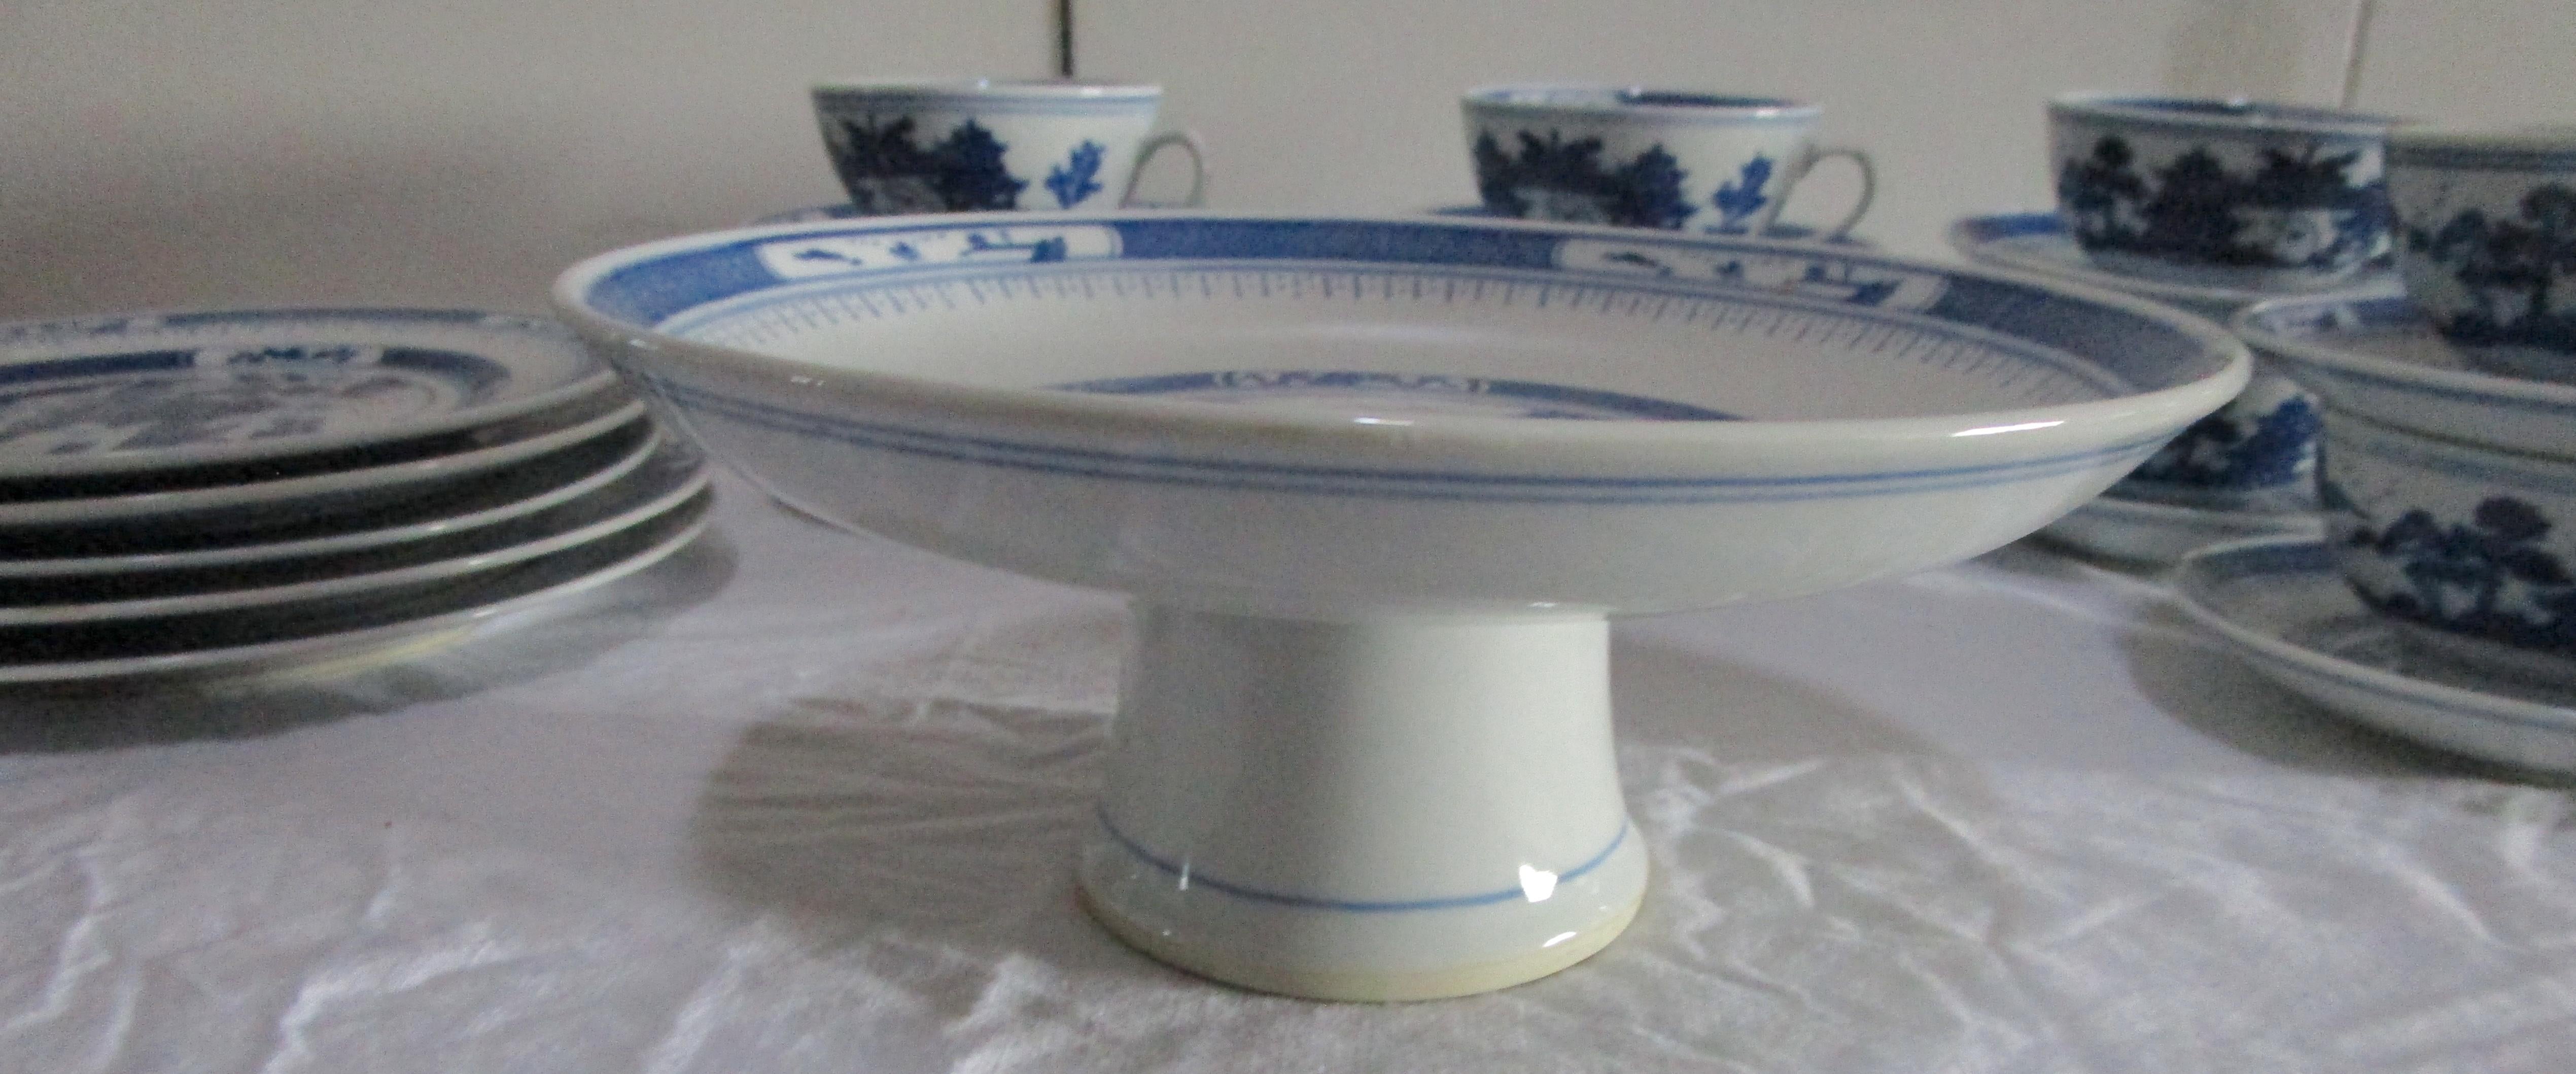 Dessert will appear extra delicious on this set of Nanking blue and white porcelain Chinese export assembled set with teapot and cups circa 1940. There is a wonderful mix of pieces for presentation: a raised circular pedestal plate ( 9 inches wide),